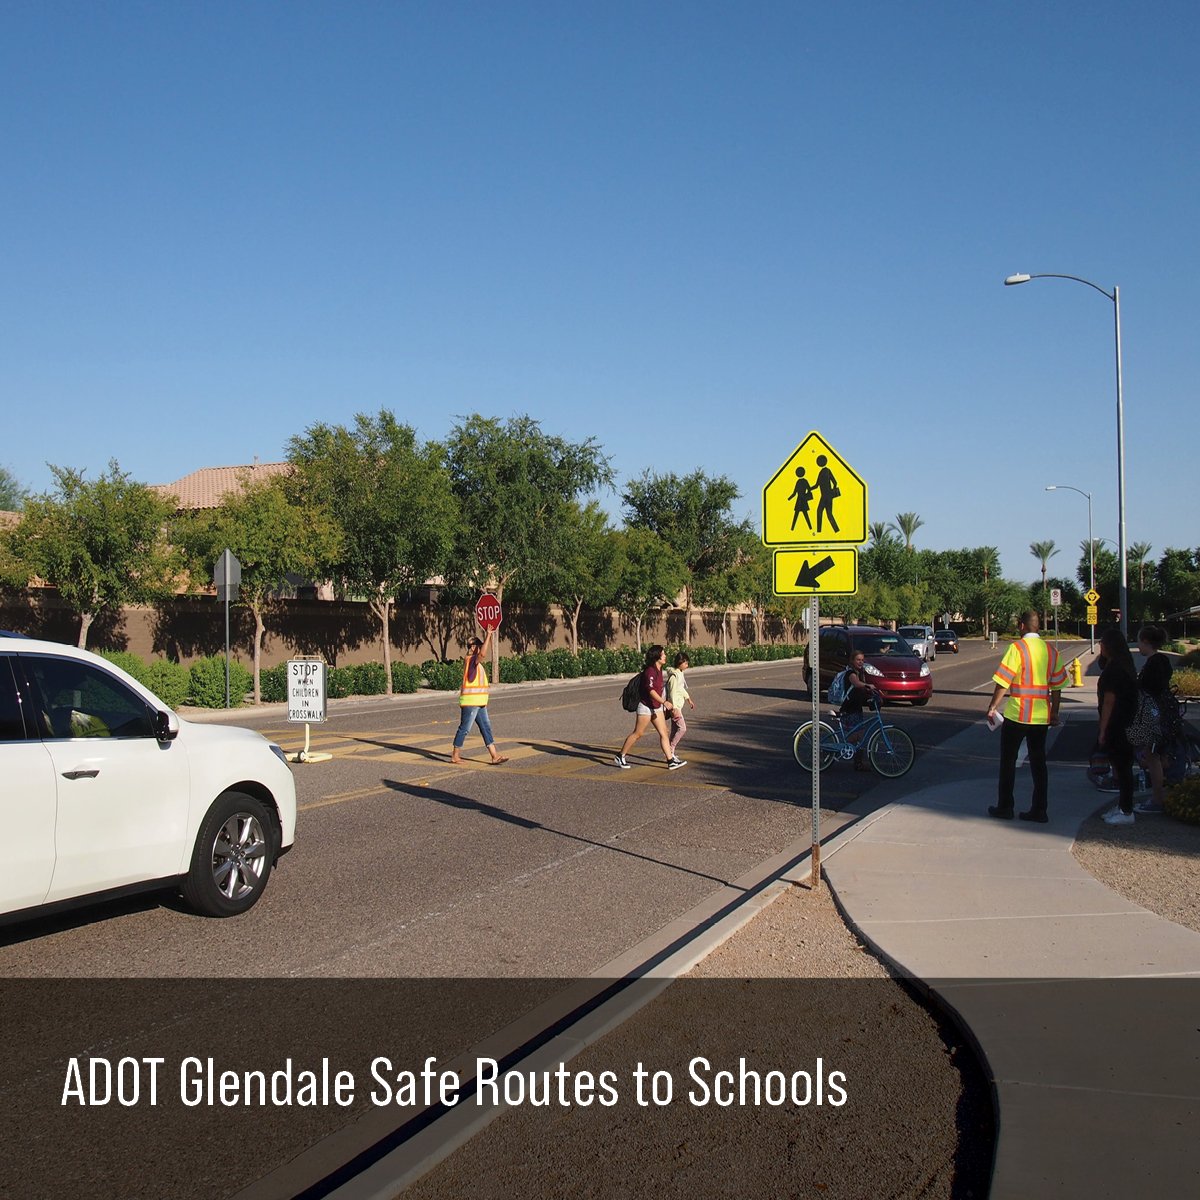 ADOT Glendale Safe Routes to Schools 4x4.jpg